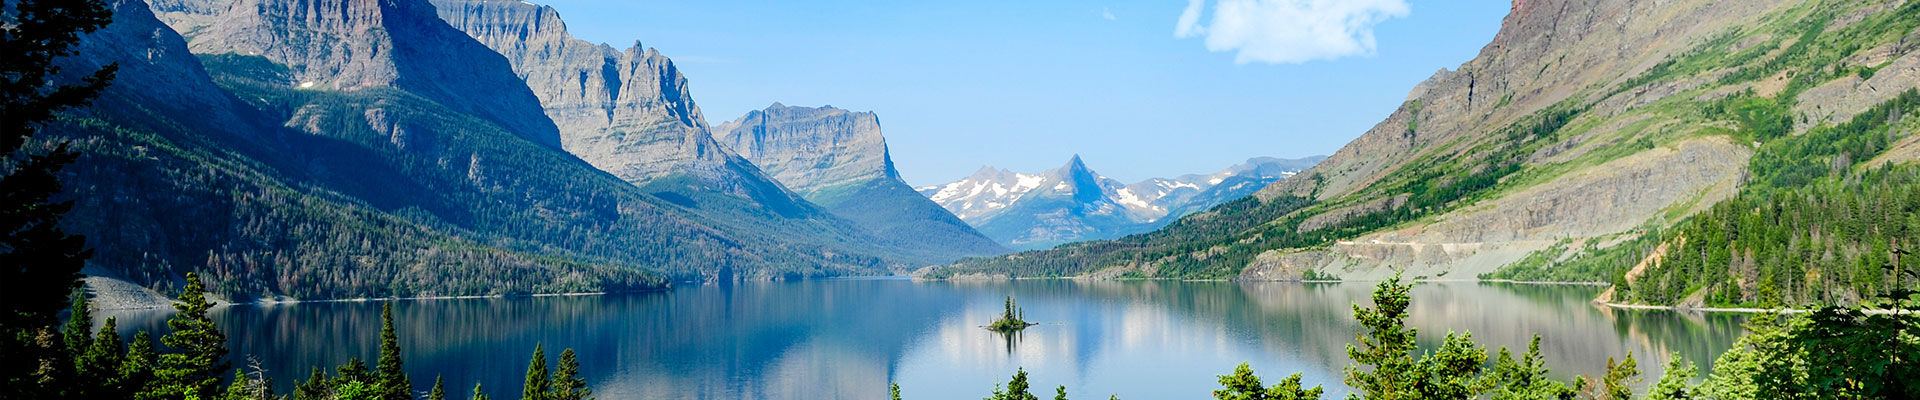 14 Day Alberta & Glacier National Park (14CAGF-070324) Image - What's Included